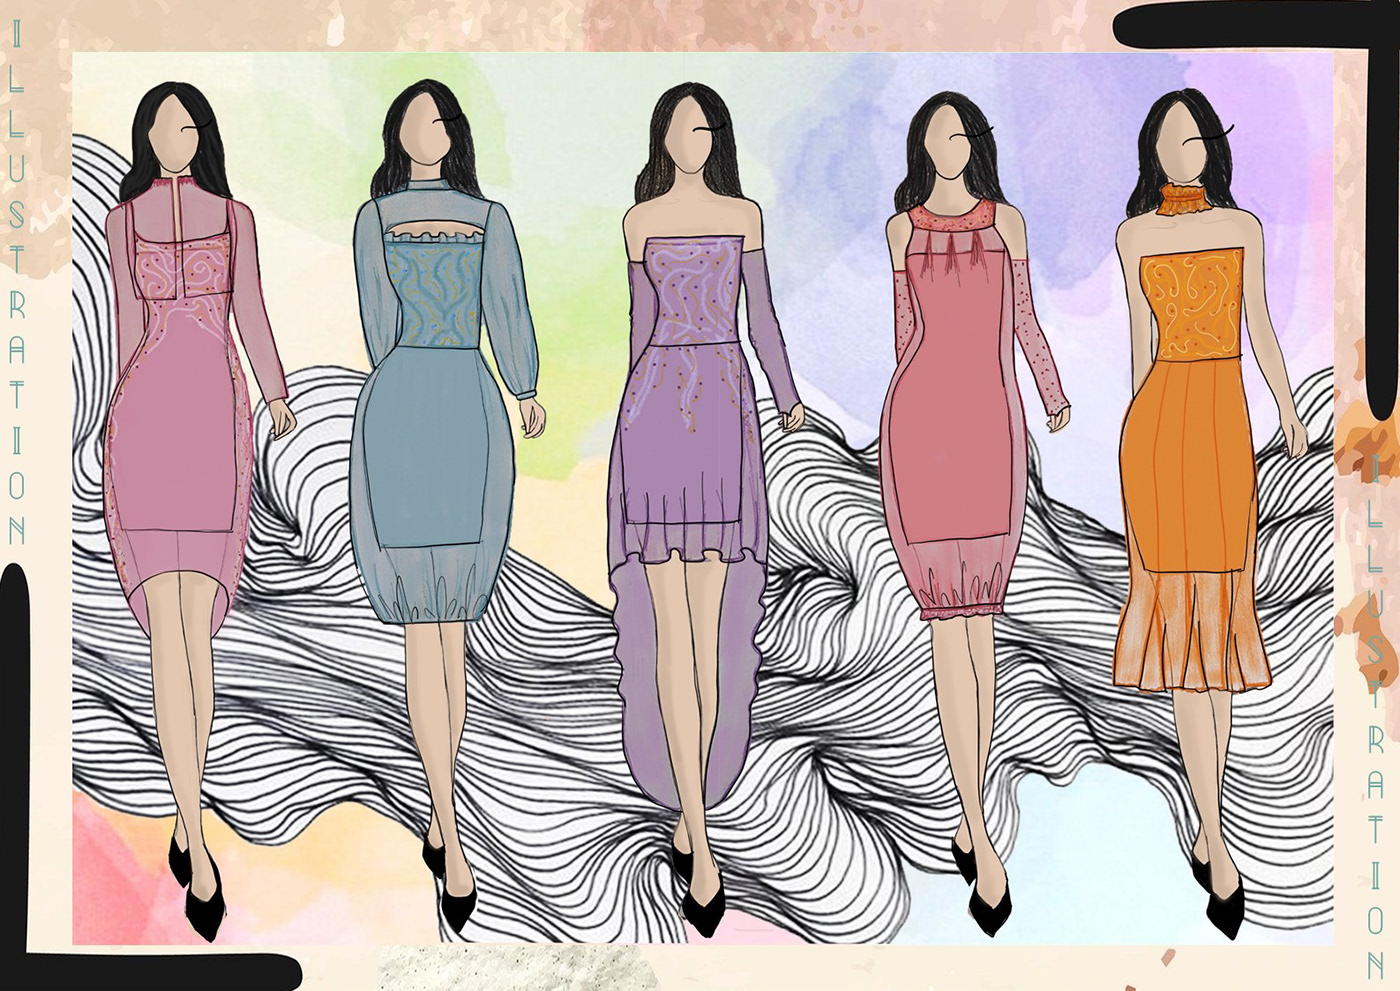 animal cell Cell EVENING WEAR pastel colors portfolio collection SHEER DRESSES THE CENTER OF LIFE